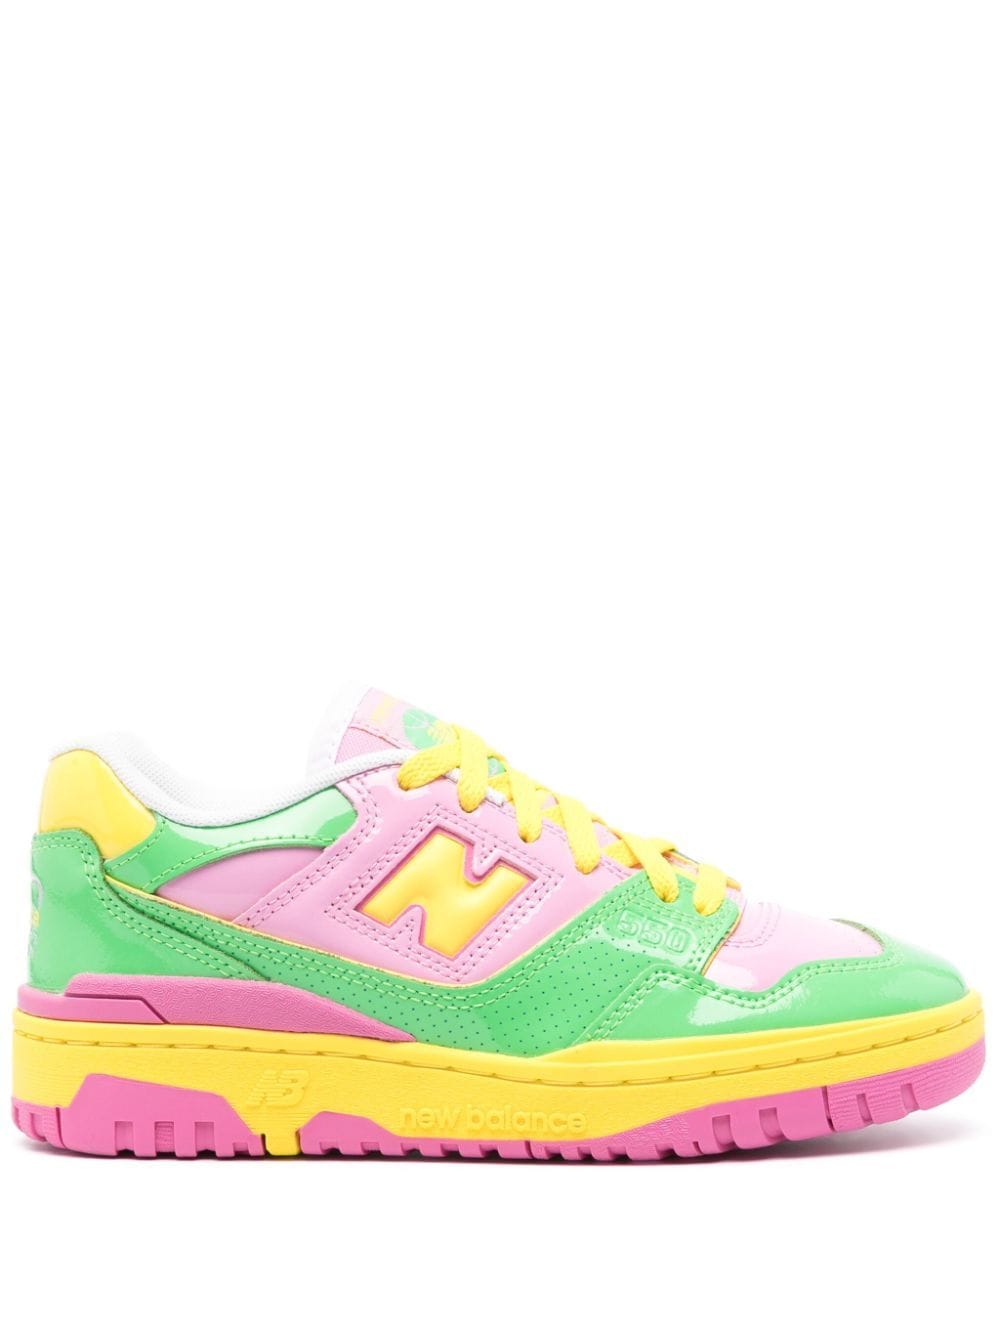 New Balance 550 Contrast Sneakers In Pink